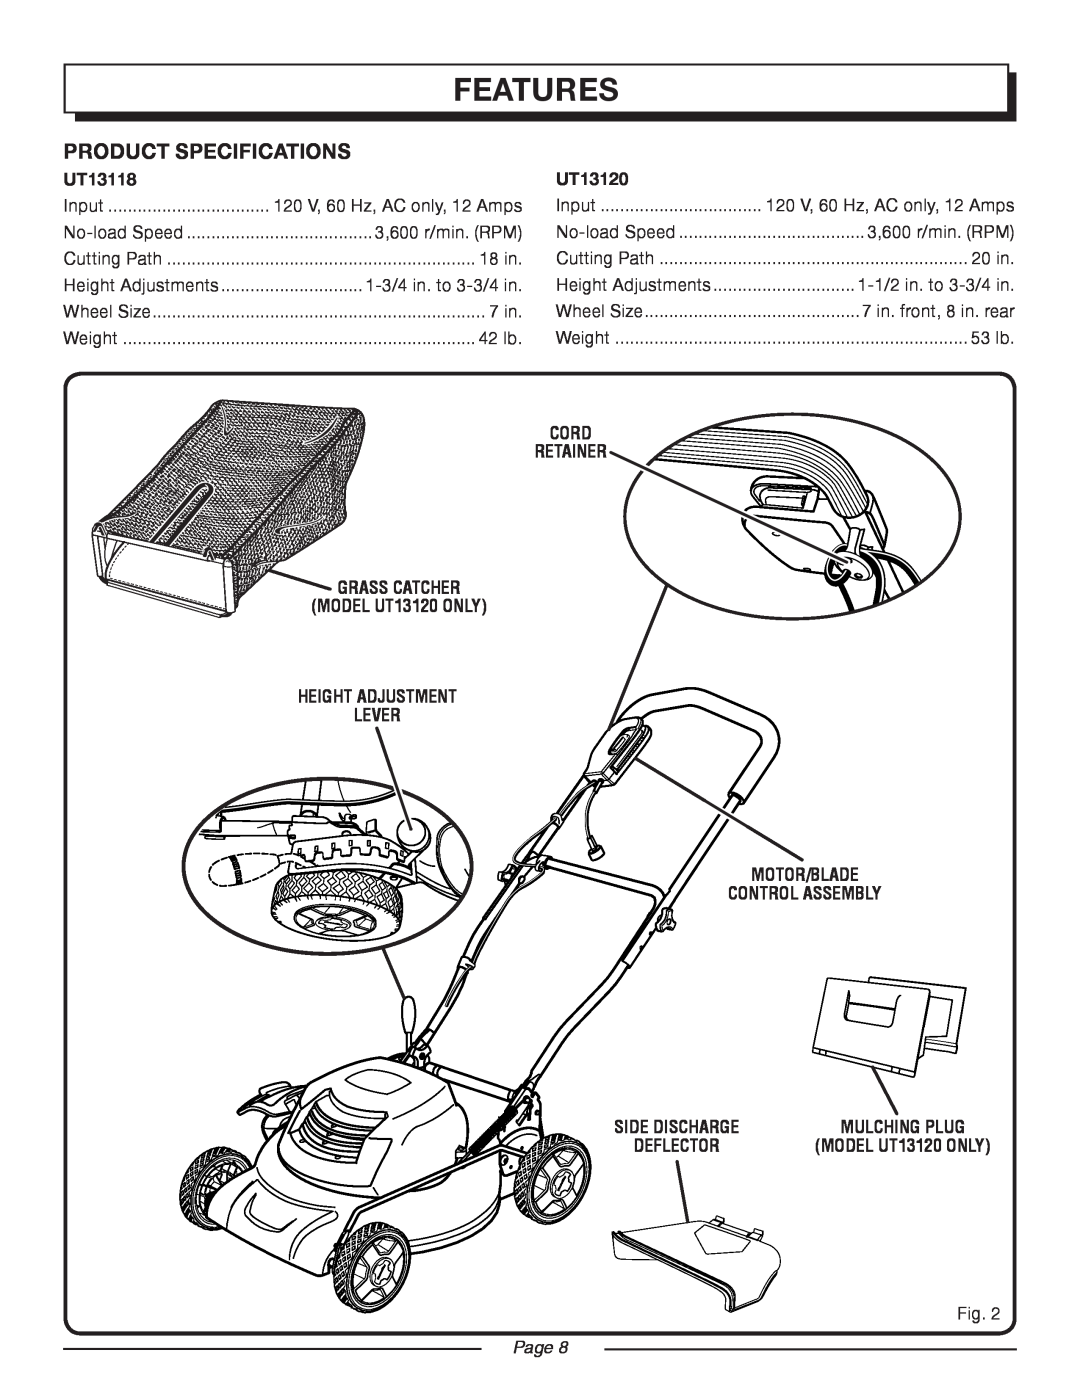 Homelite UT13118 manual Features, Product Specifications, UT13120, Lever Motor/Blade Control Assembly, Page 